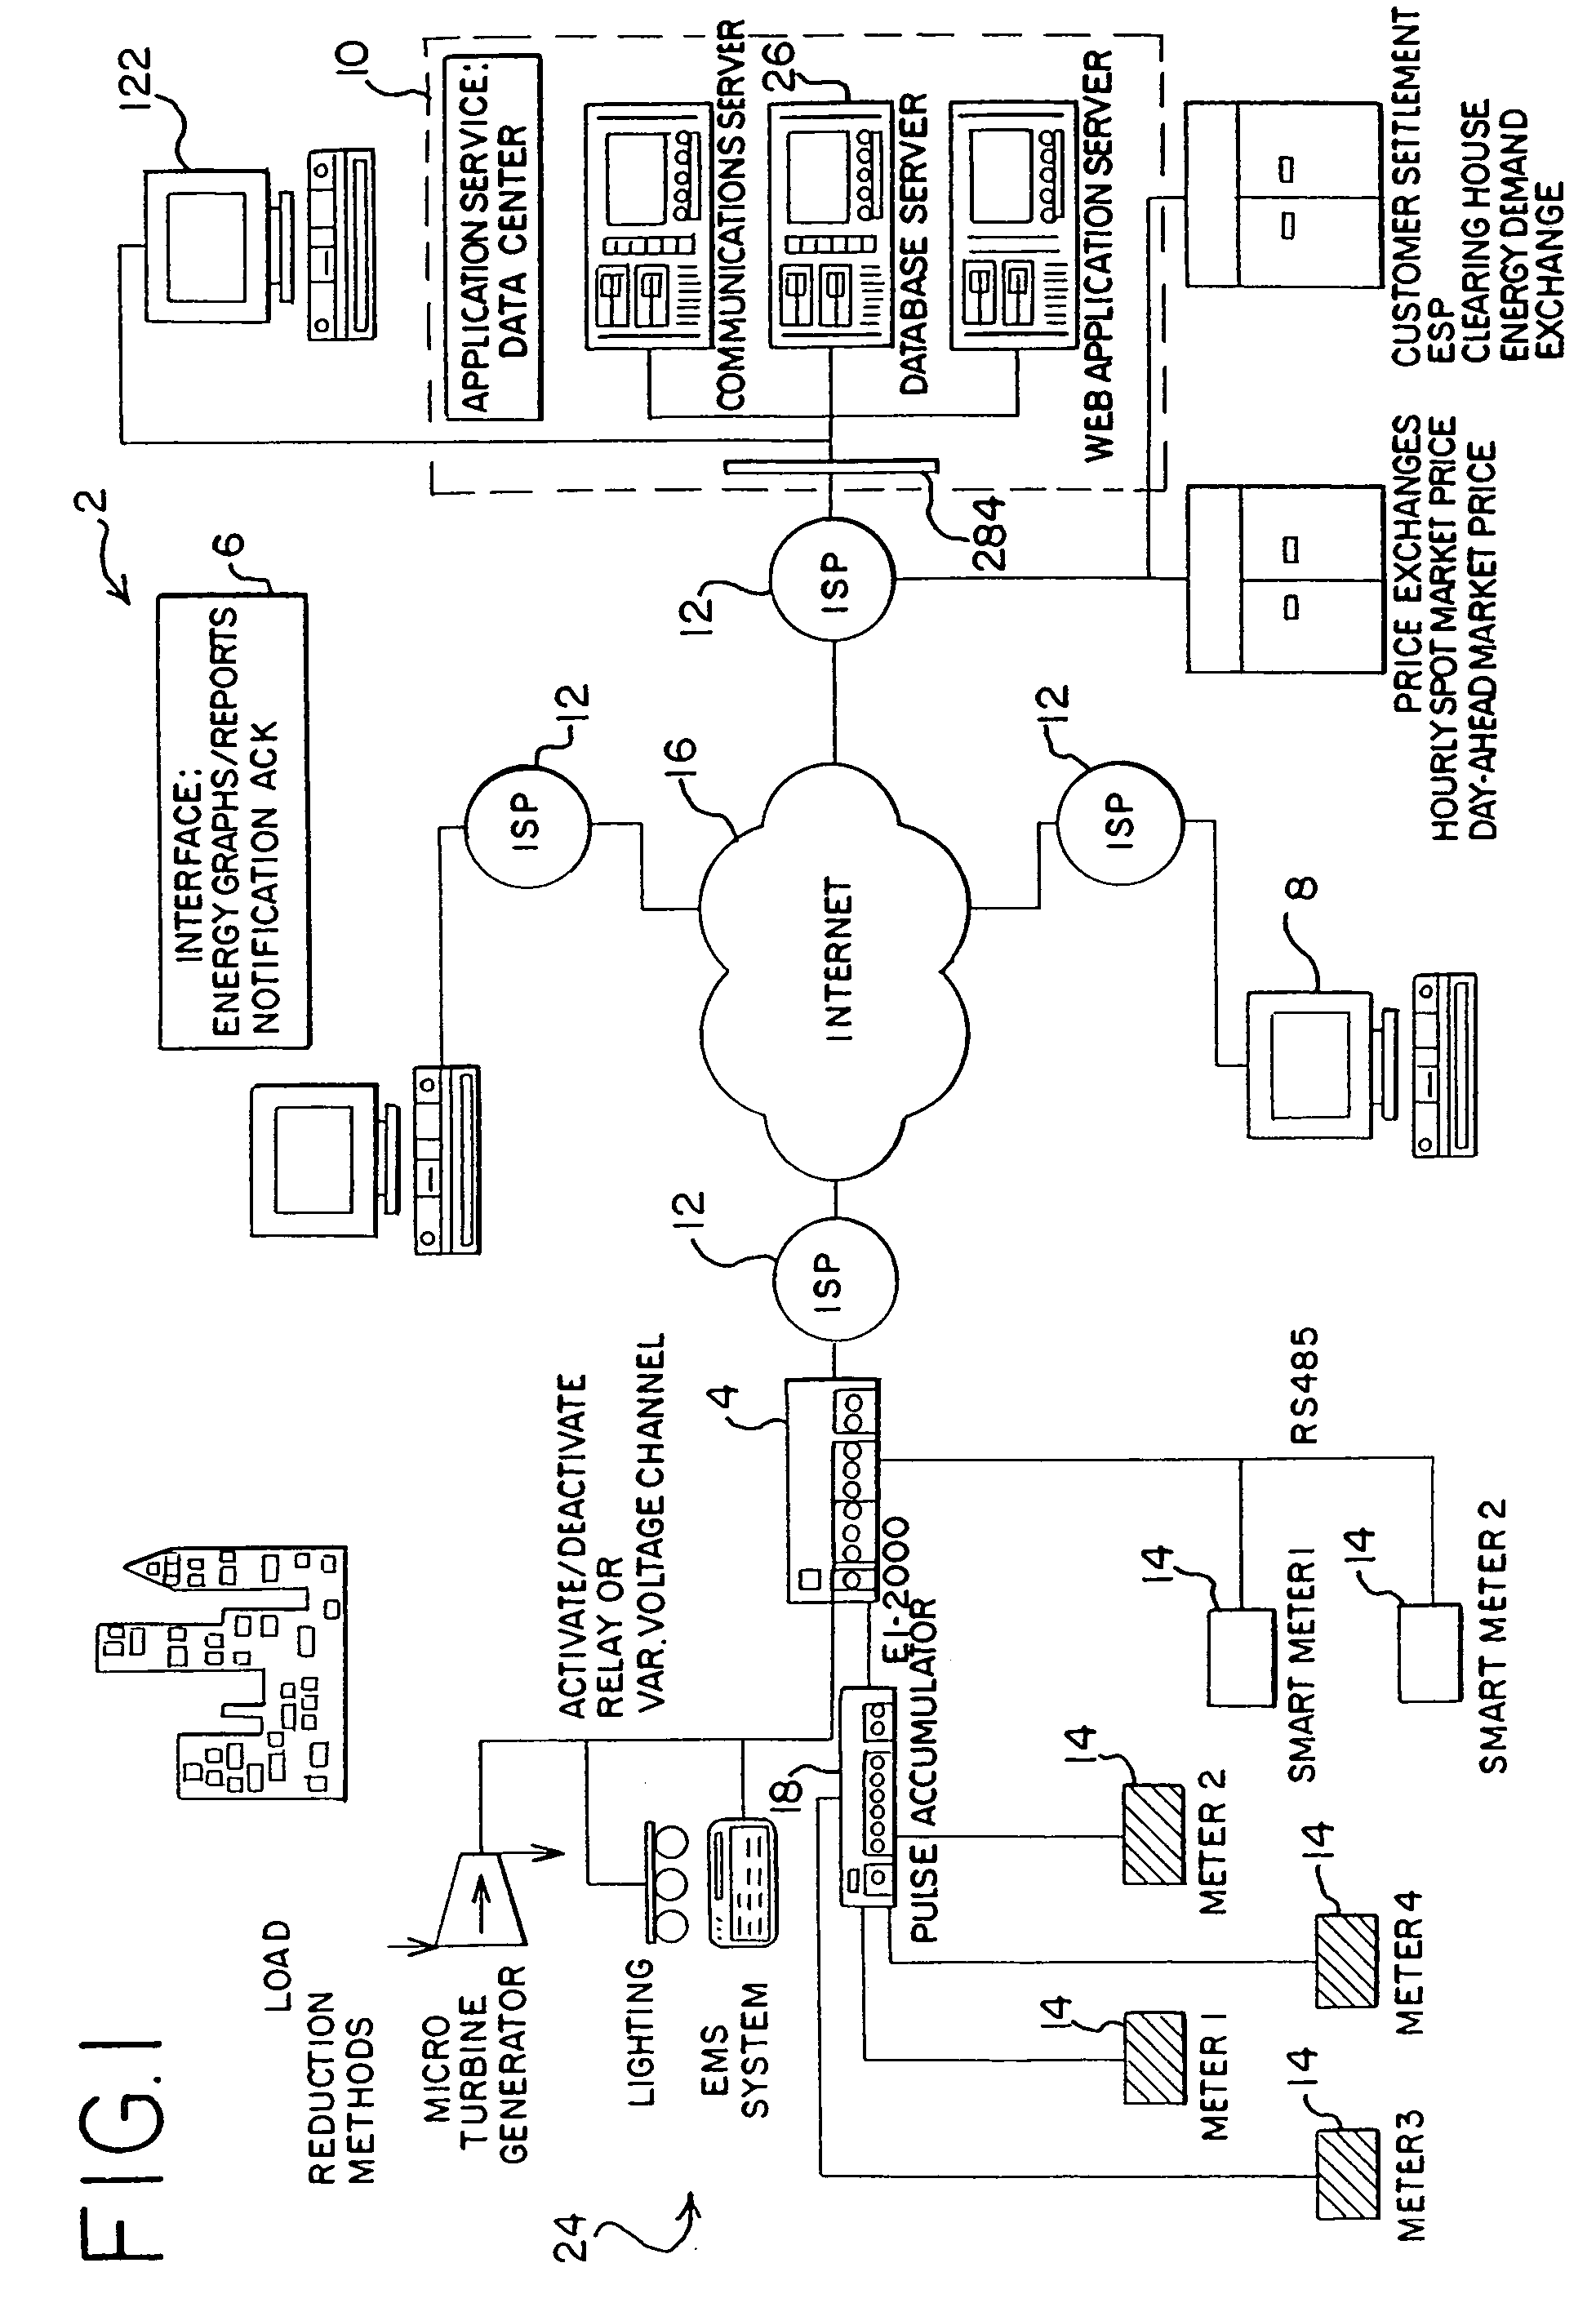 System and method for monitoring and controlling energy distribution